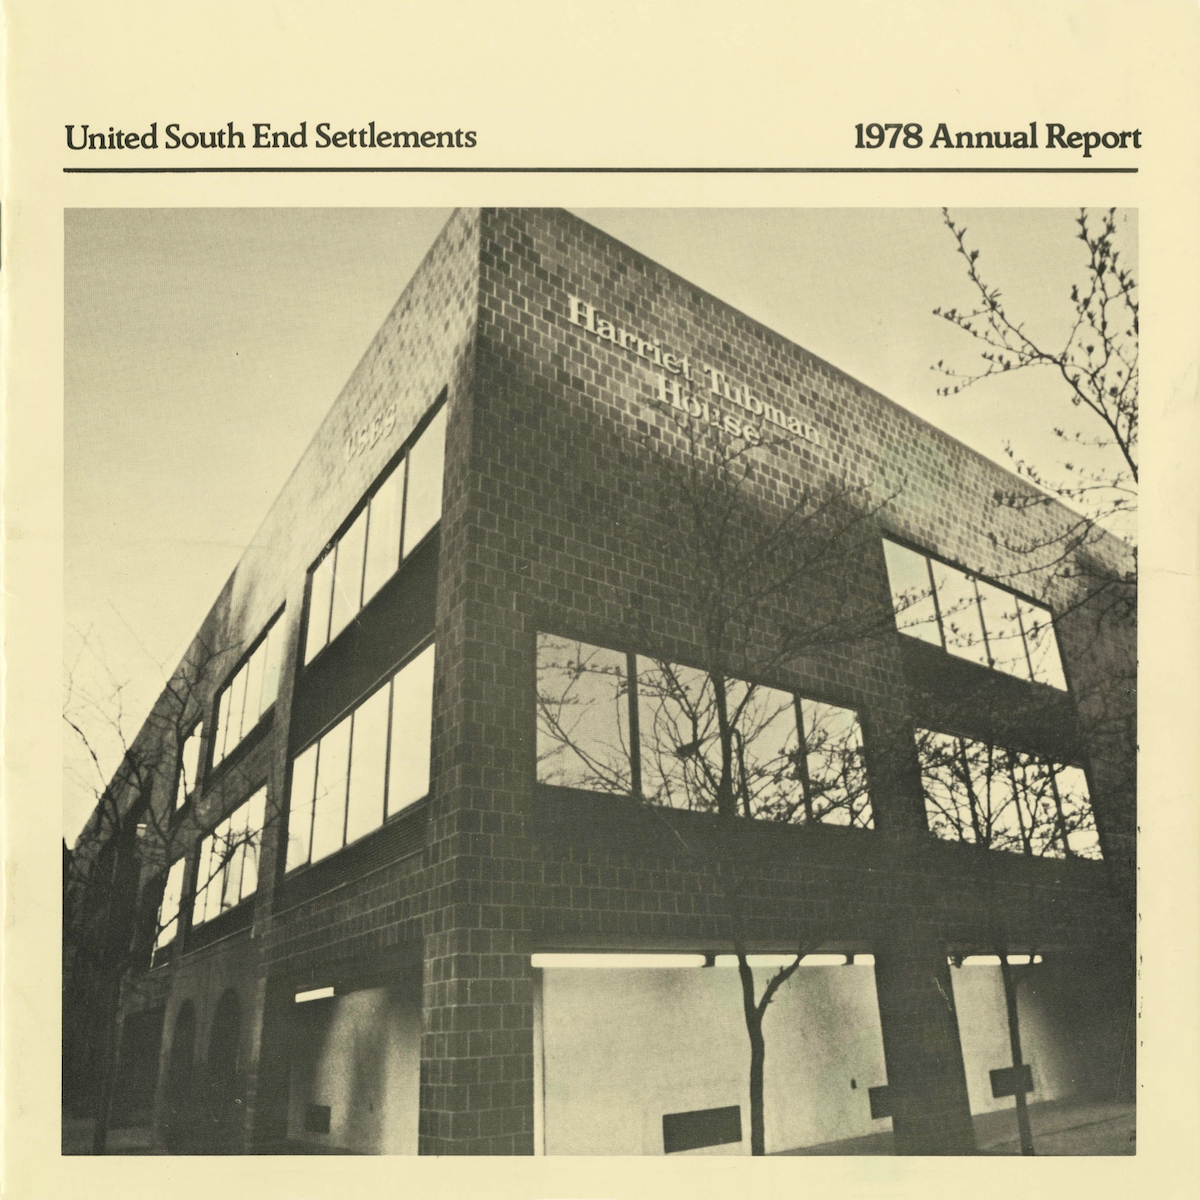 The United South End Settlement 1978 Annual Report details 10 human service programs, one training program, three planning grants for neighborhood revitalization and community development, and a year-round camp in New Hampshire.